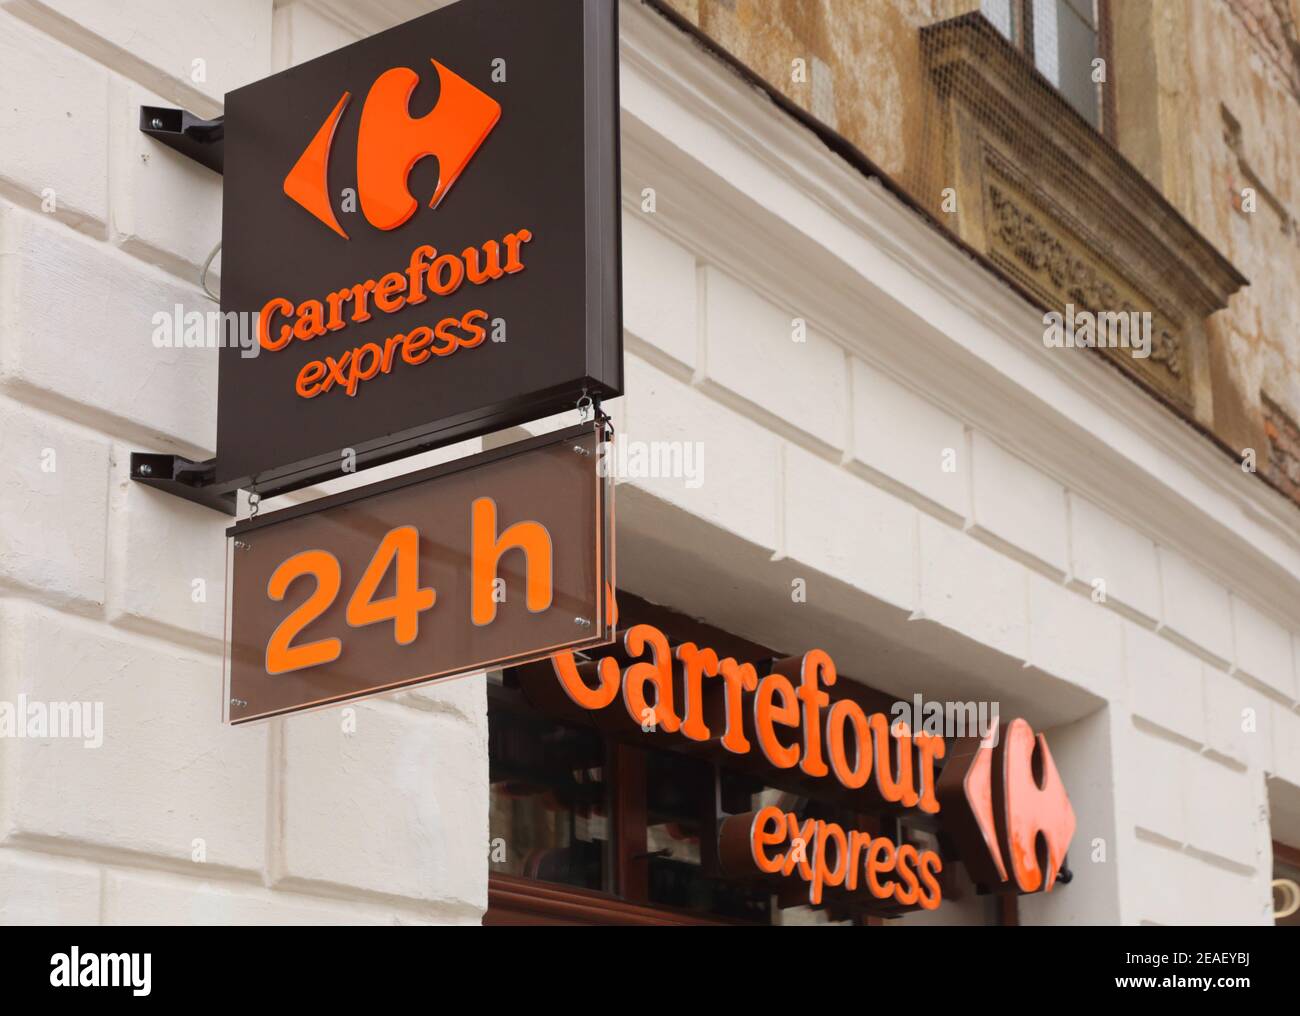 Cracow. Krakow, Poland. Carrefour Express grocery store logo on the facade of the shop. Stock Photo